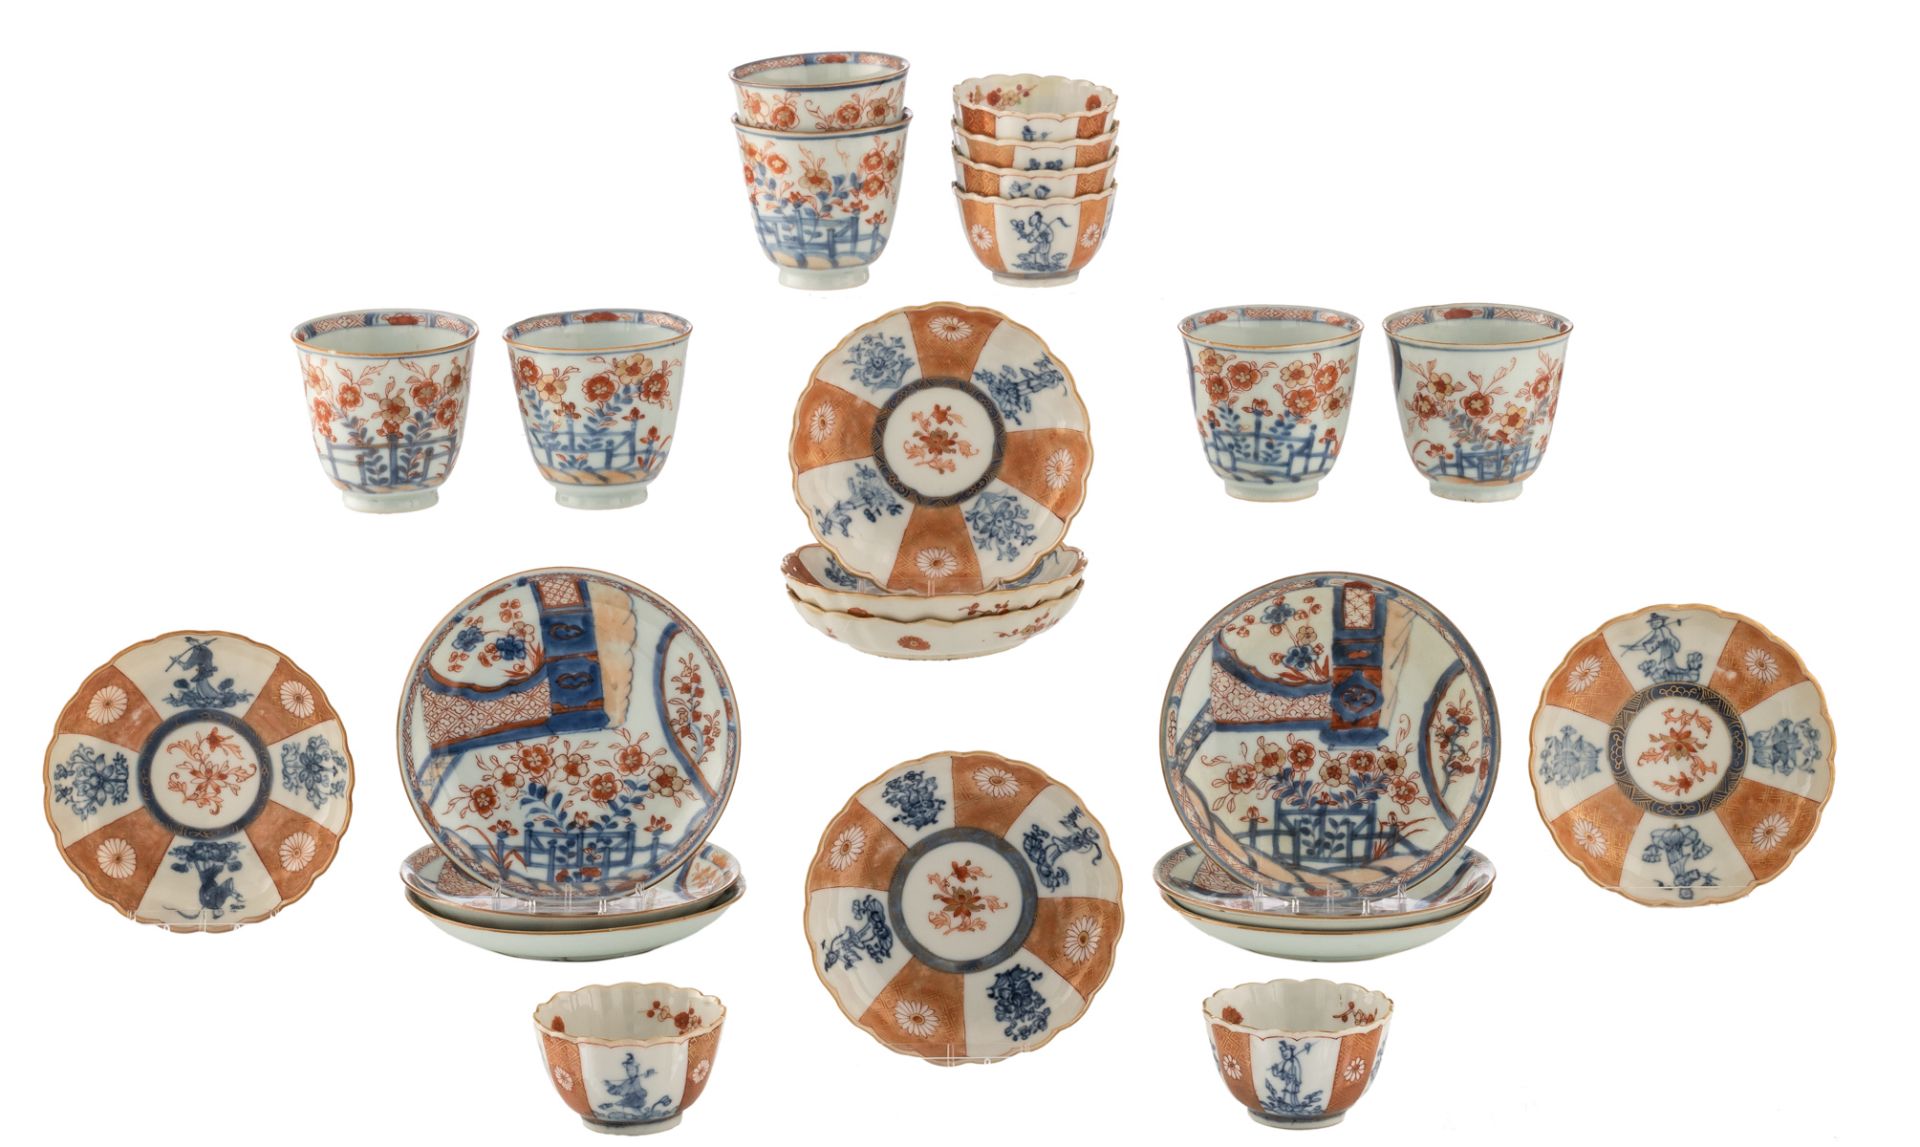 A lot of two Chinese Imari cup and saucer services, Yongzheng - Qianlong (ca 1730-1740), H 4-7 - ø 1